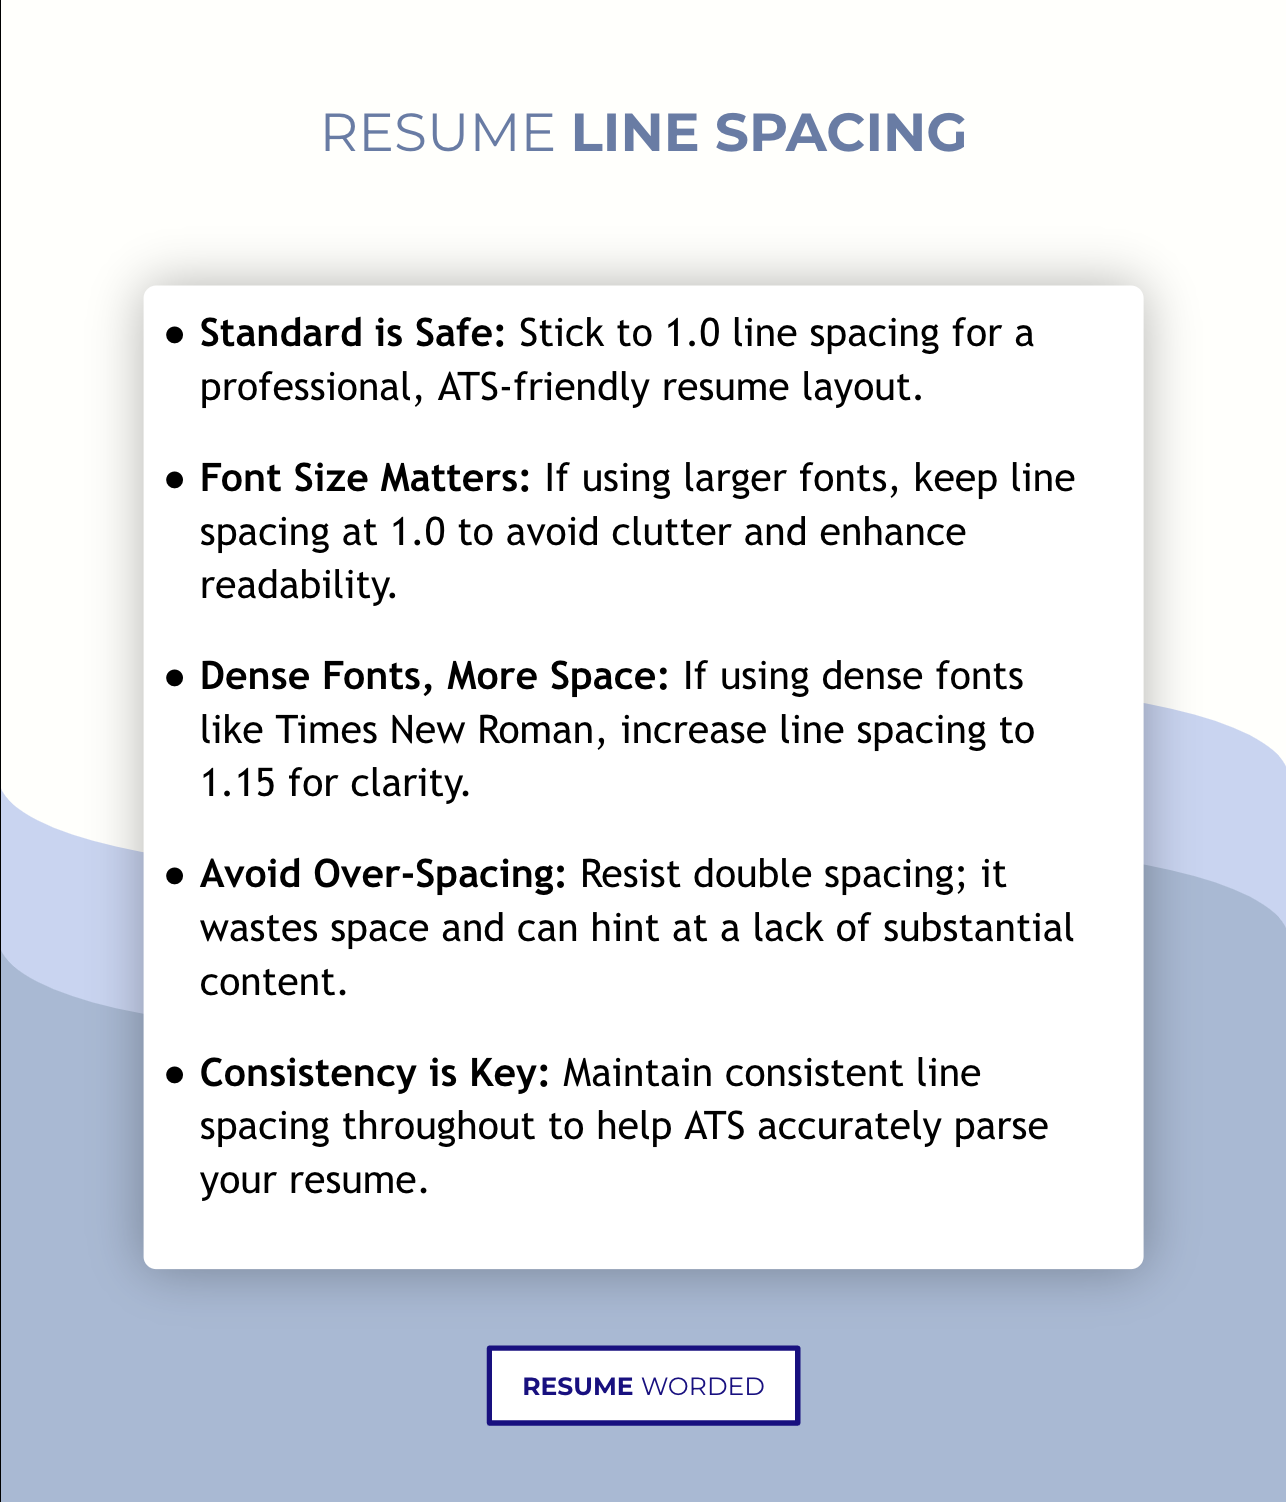 Getting the Basics Right: Resume Line Spacing